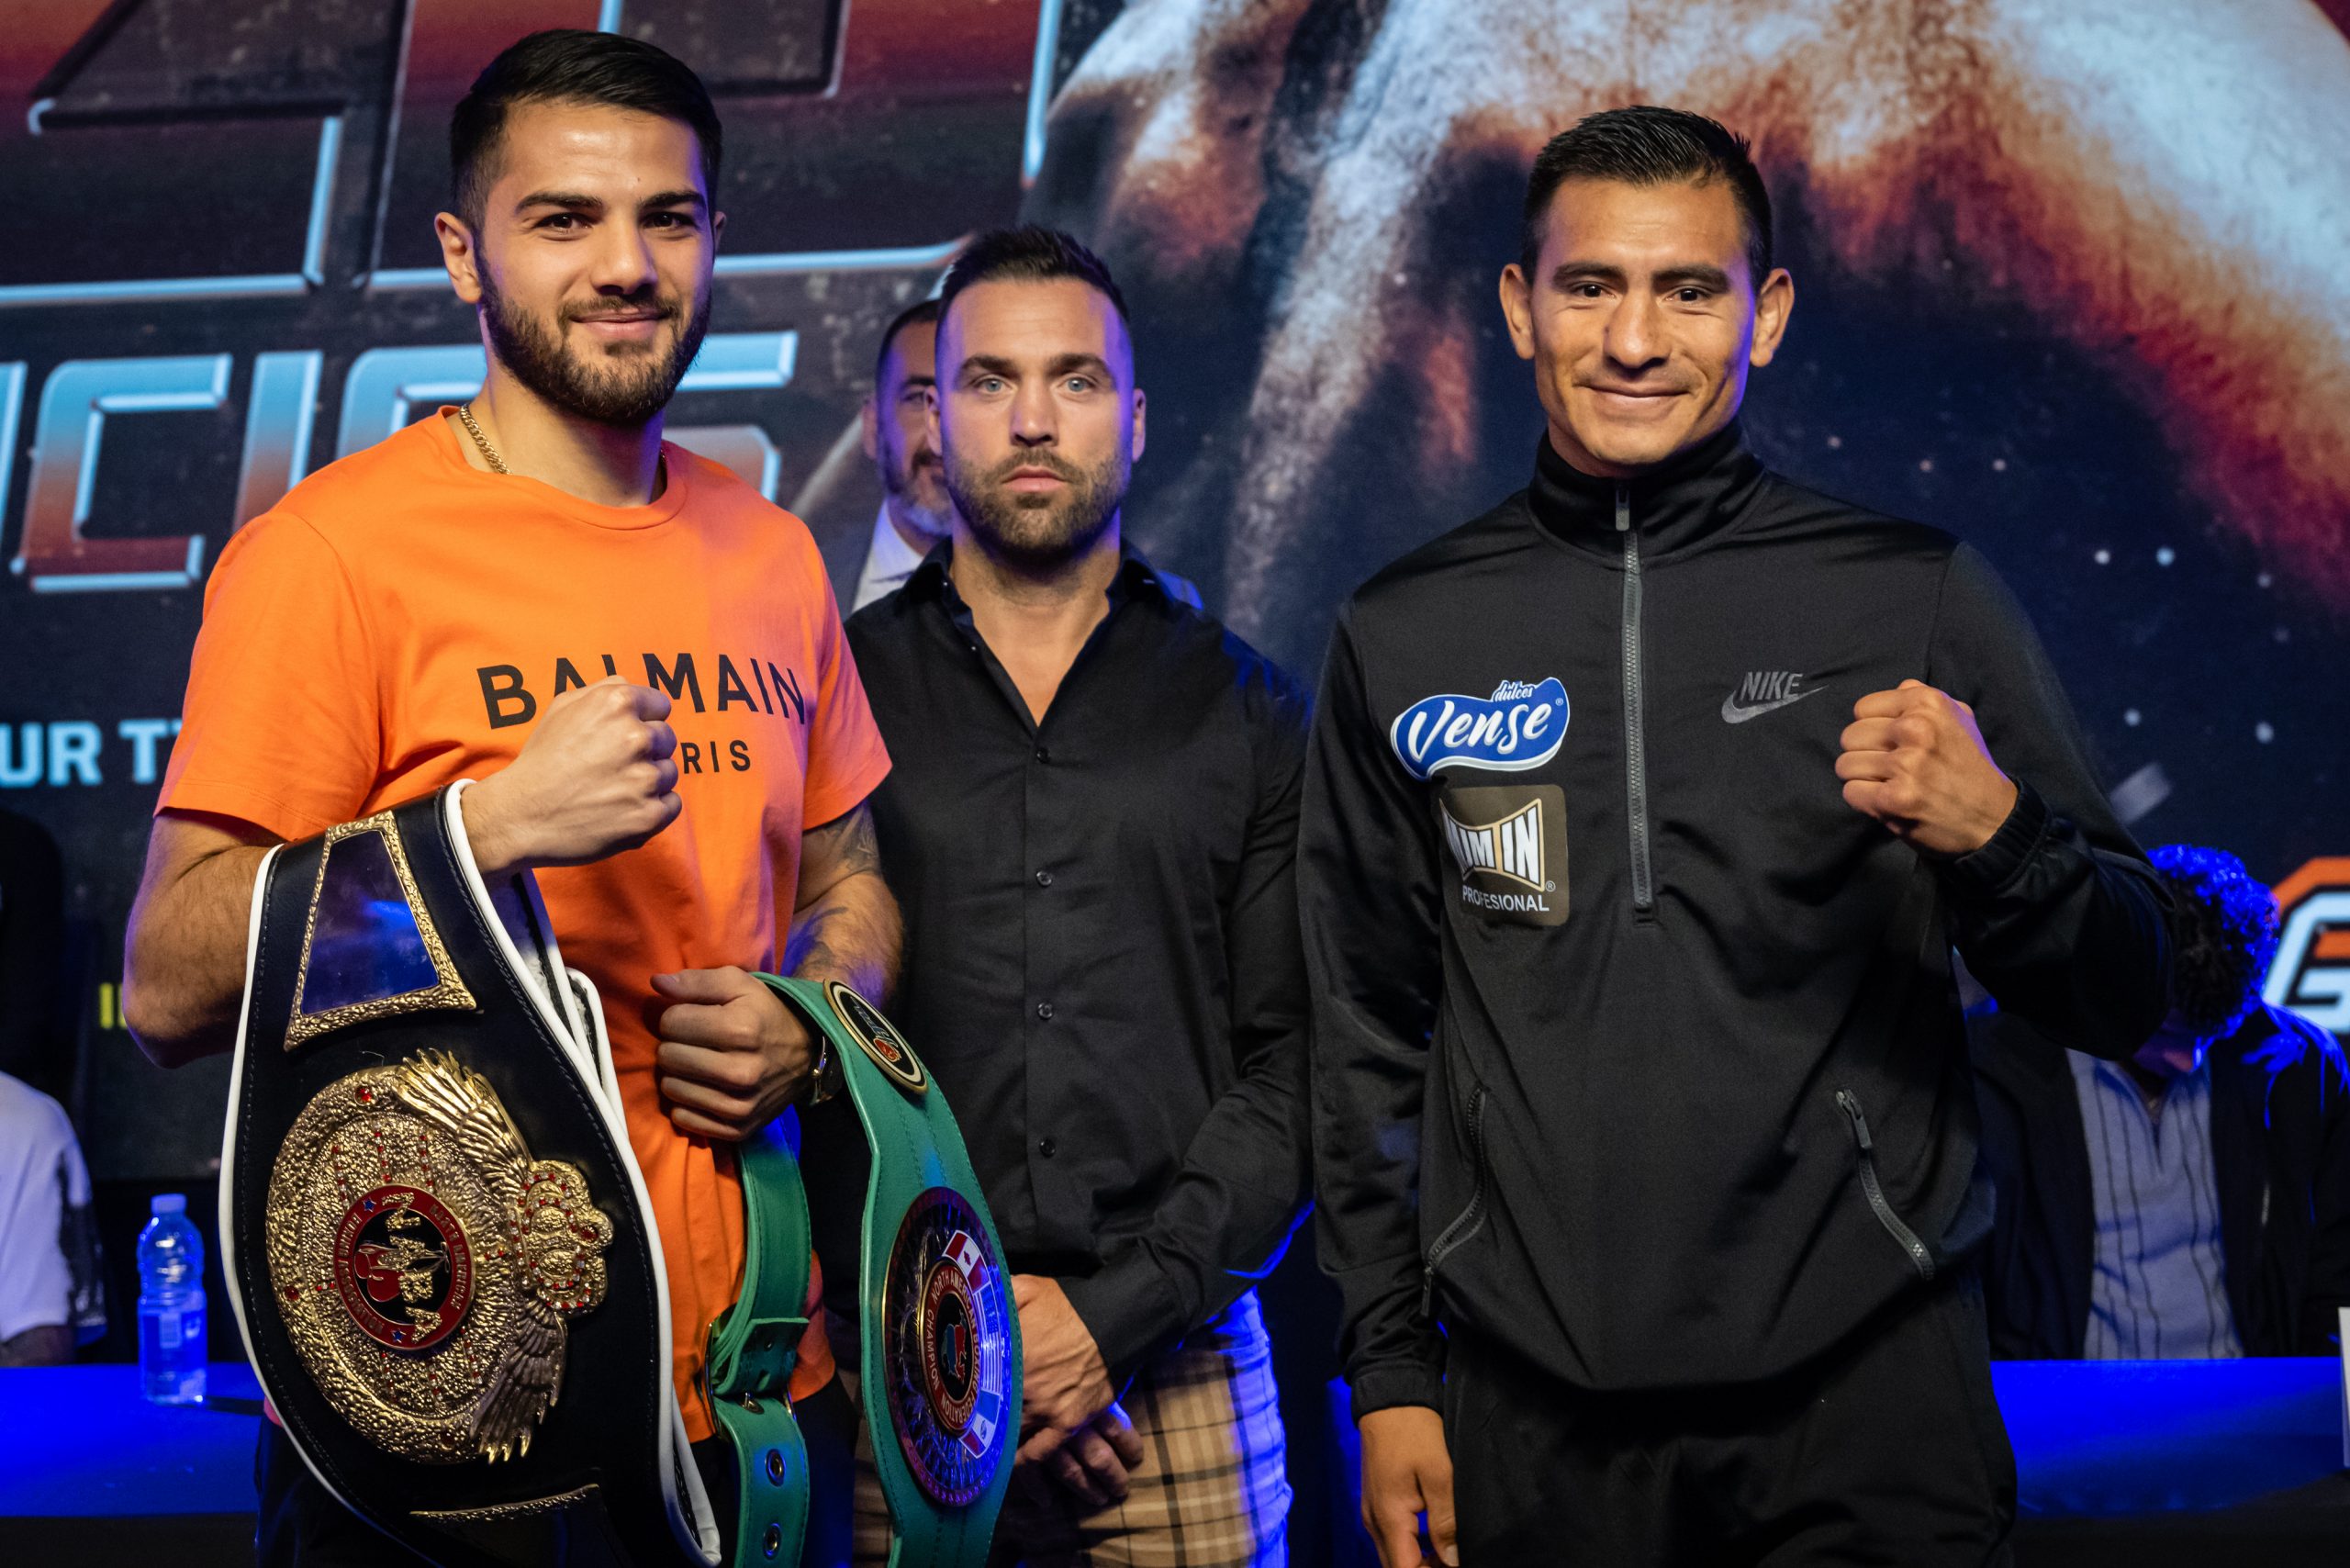 Erik Bazinyan feels he is in a ‘must-win fight’ against Jose Macias on Thursday in Canada